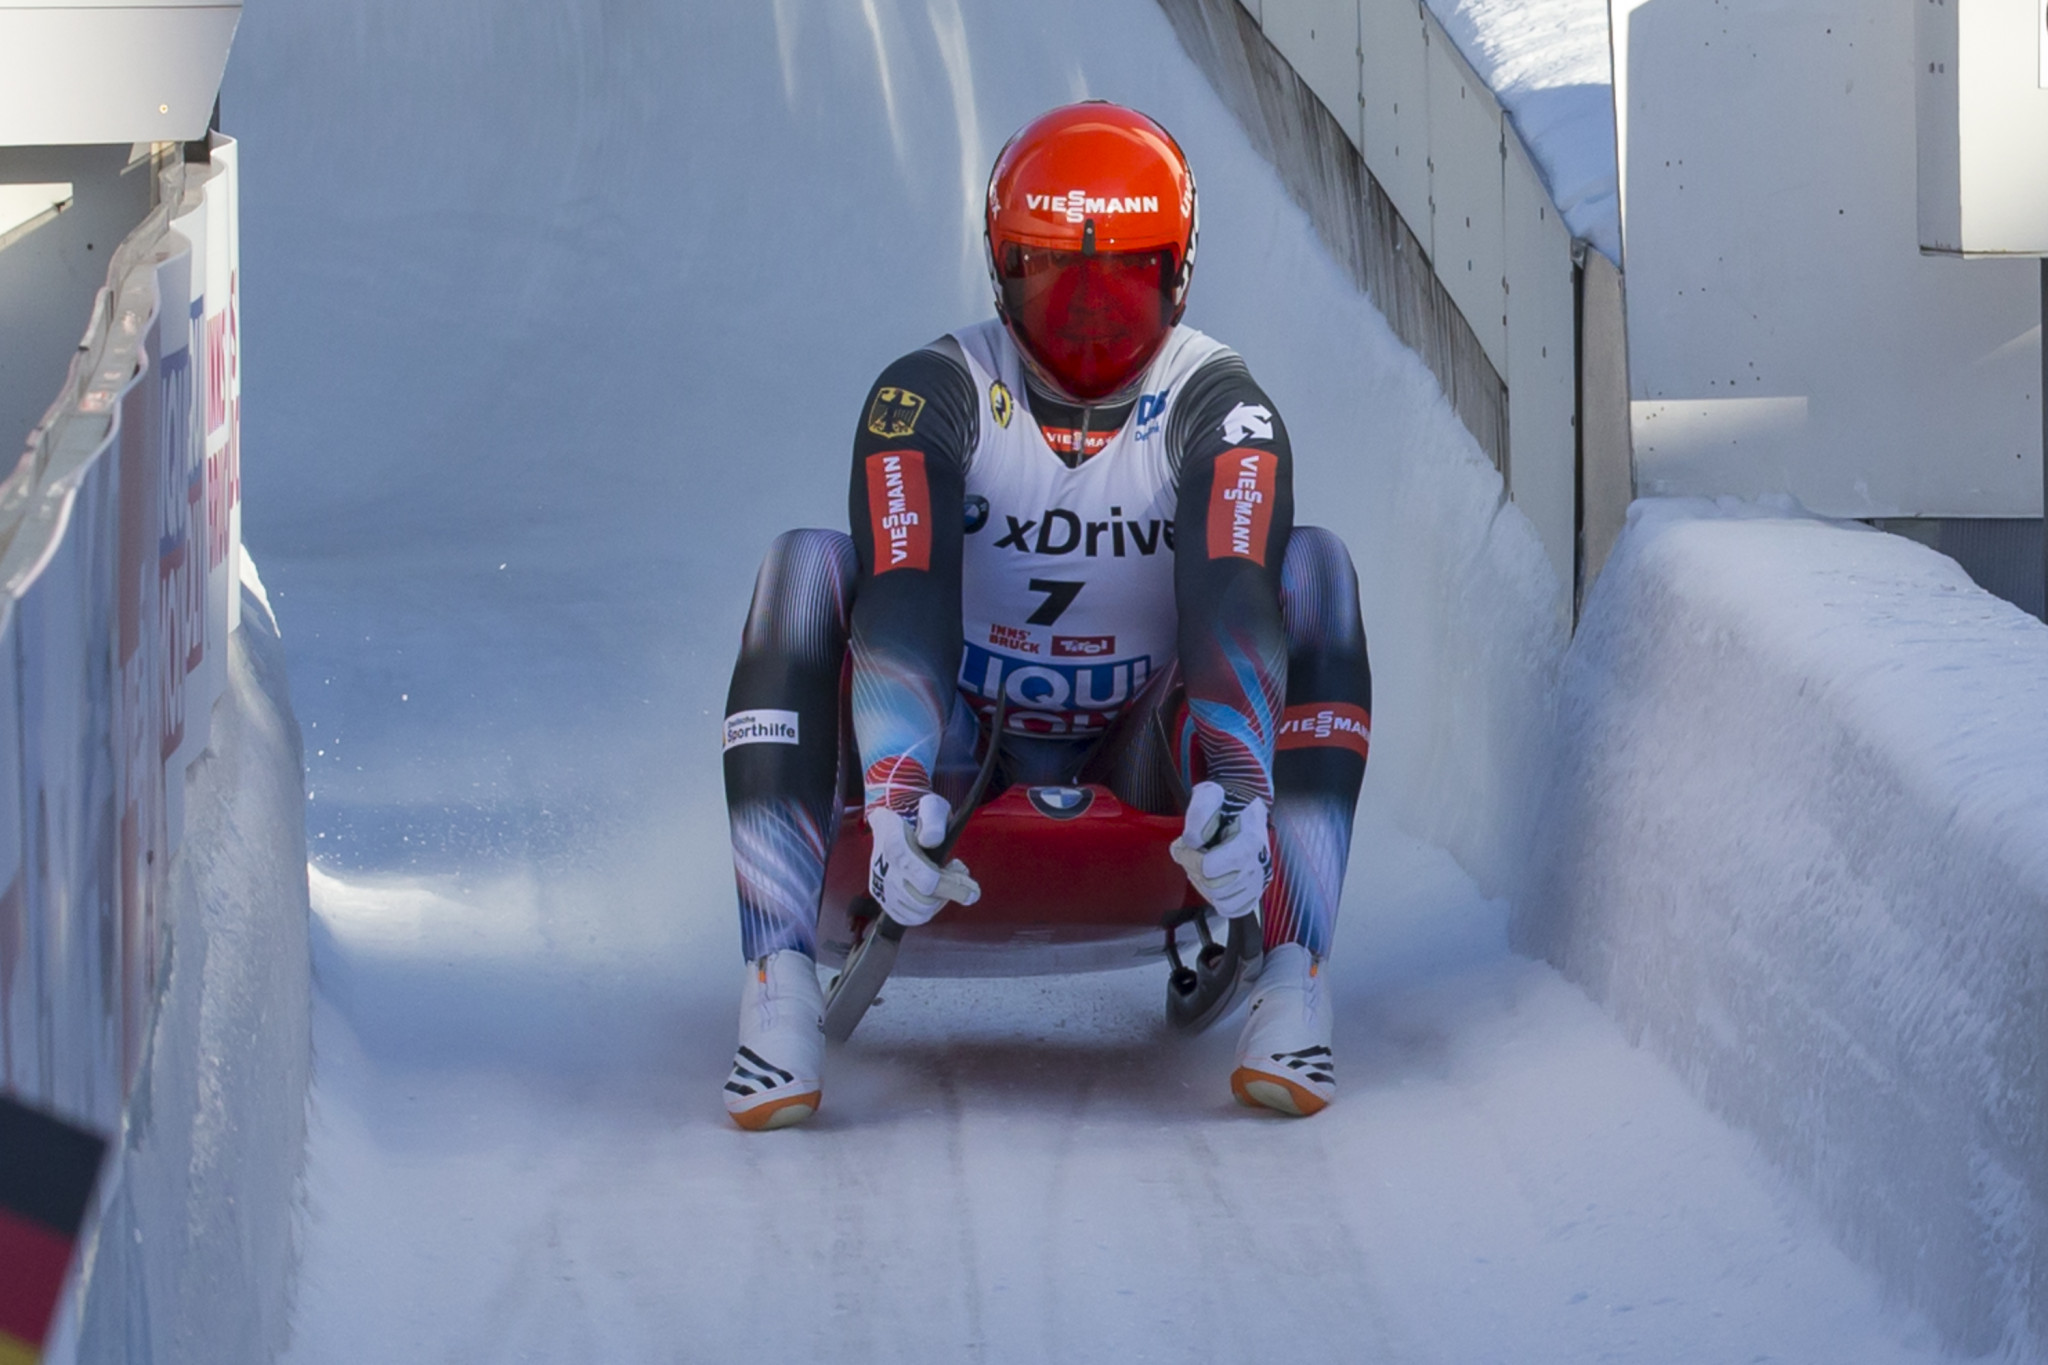 Loch and Geisenberger out to extend overall leads at season's penultimate Luge World Cup